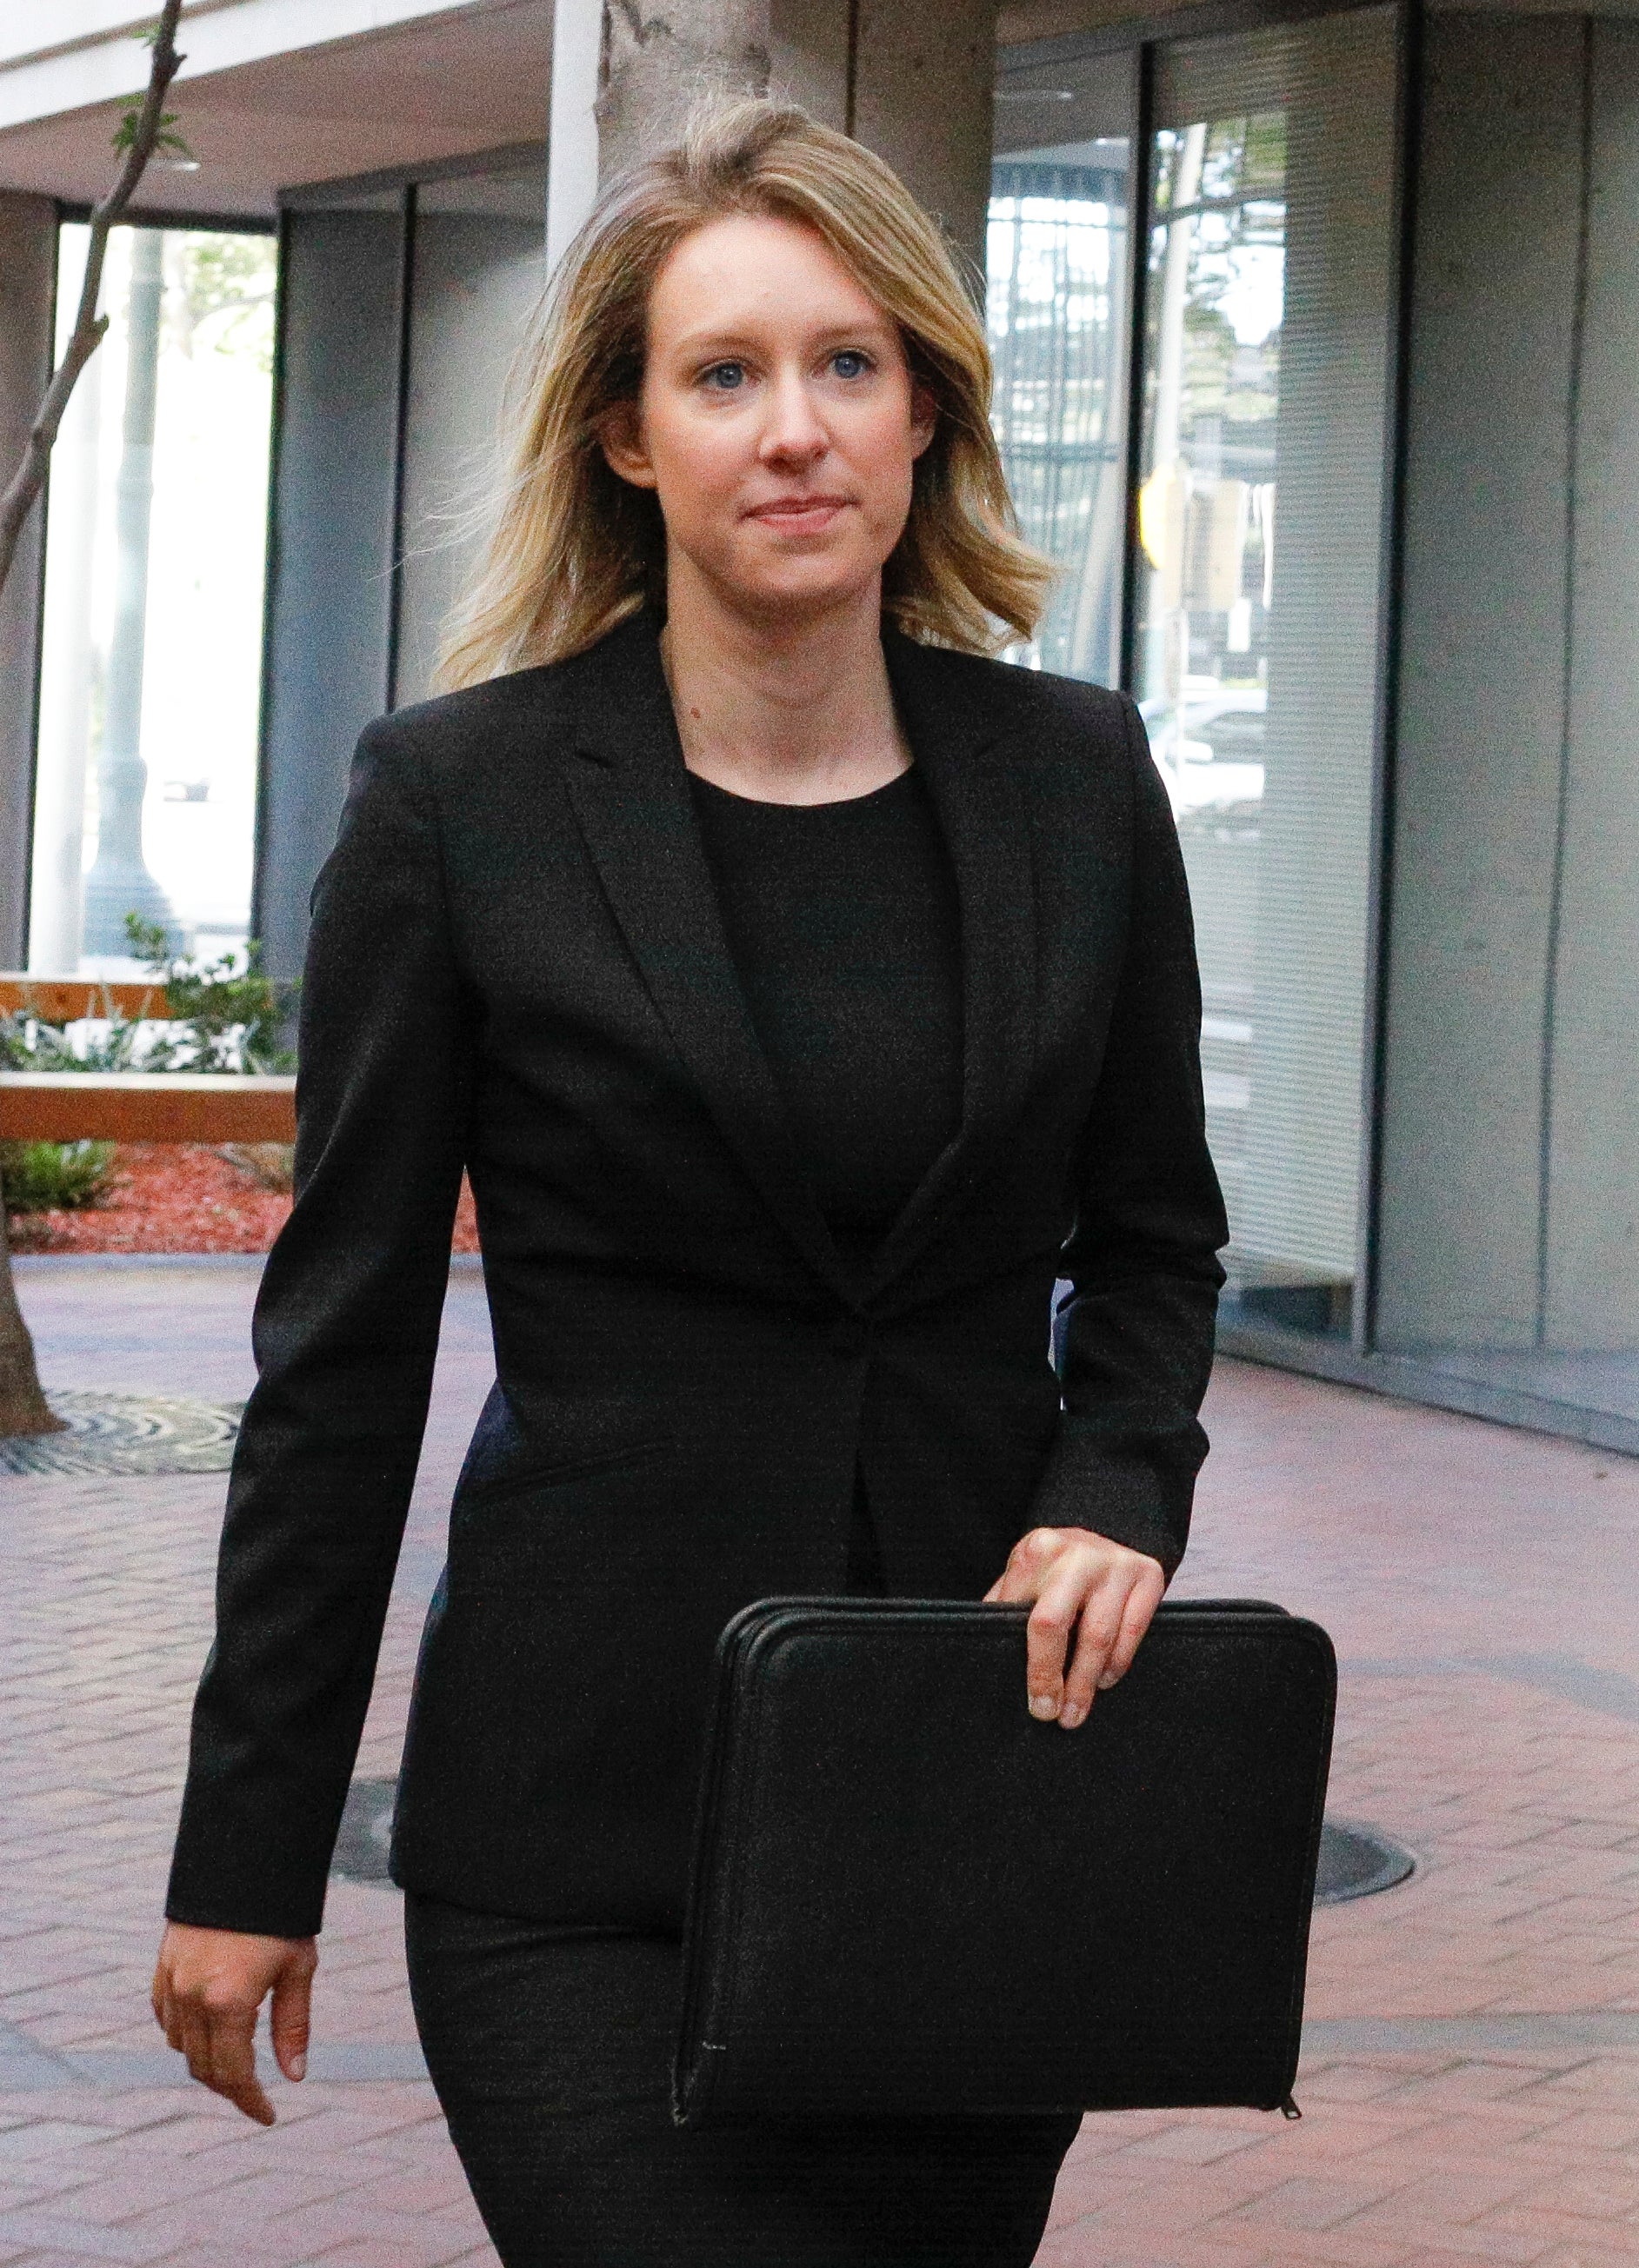 Elizabeth Holmes appears at a status hearing on 17 July 2019 in San Jose, California